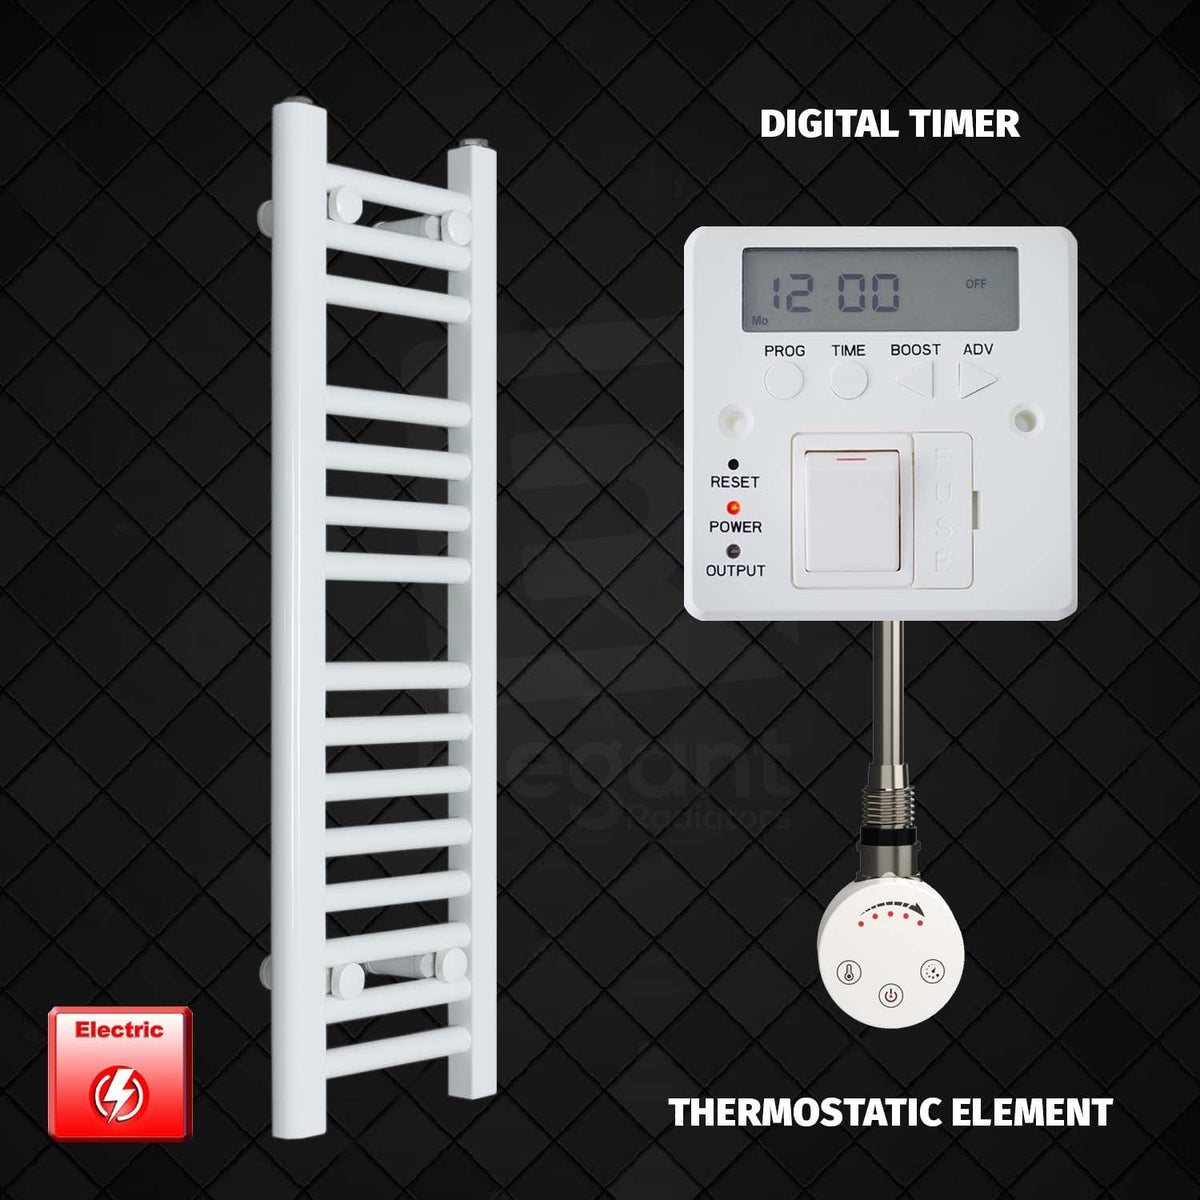 800 mm High 250 mm Wide Pre-Filled Electric Heated Towel Rail Radiator White Thermostatic Element Digital Timer